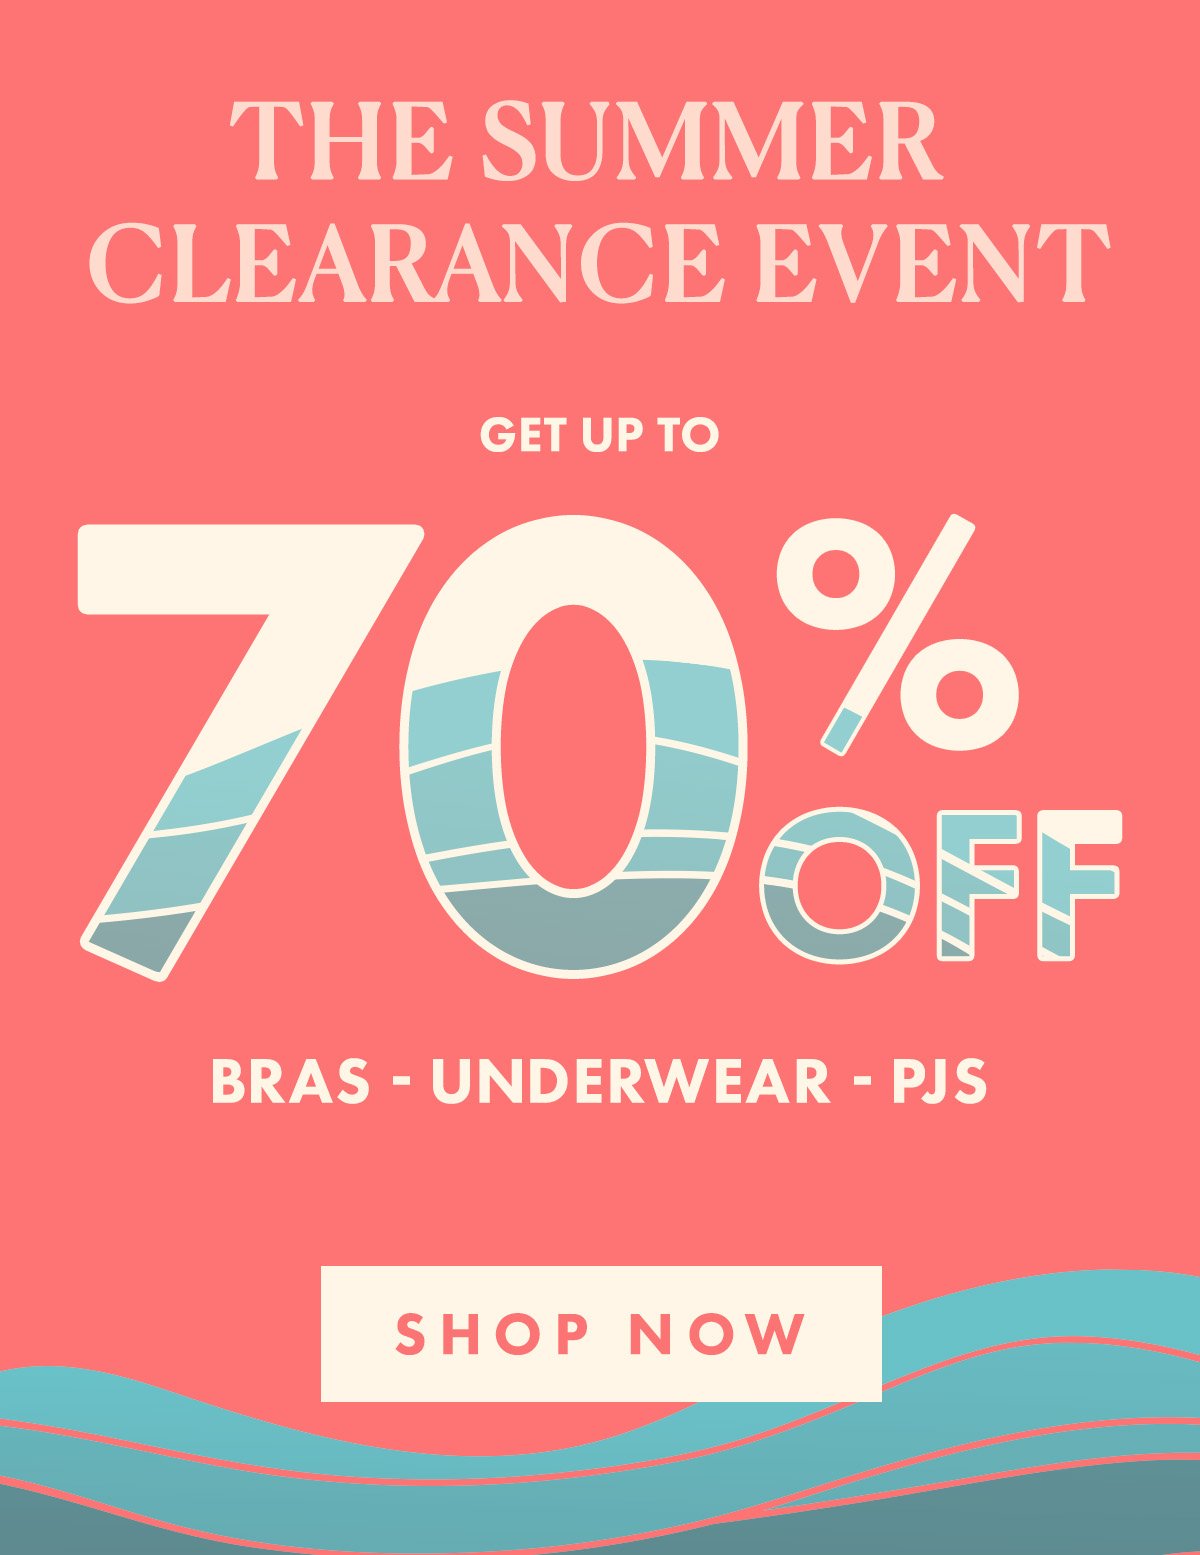 The Summer Clearance Event: Get up to 70% off bras, underwear, & PJs